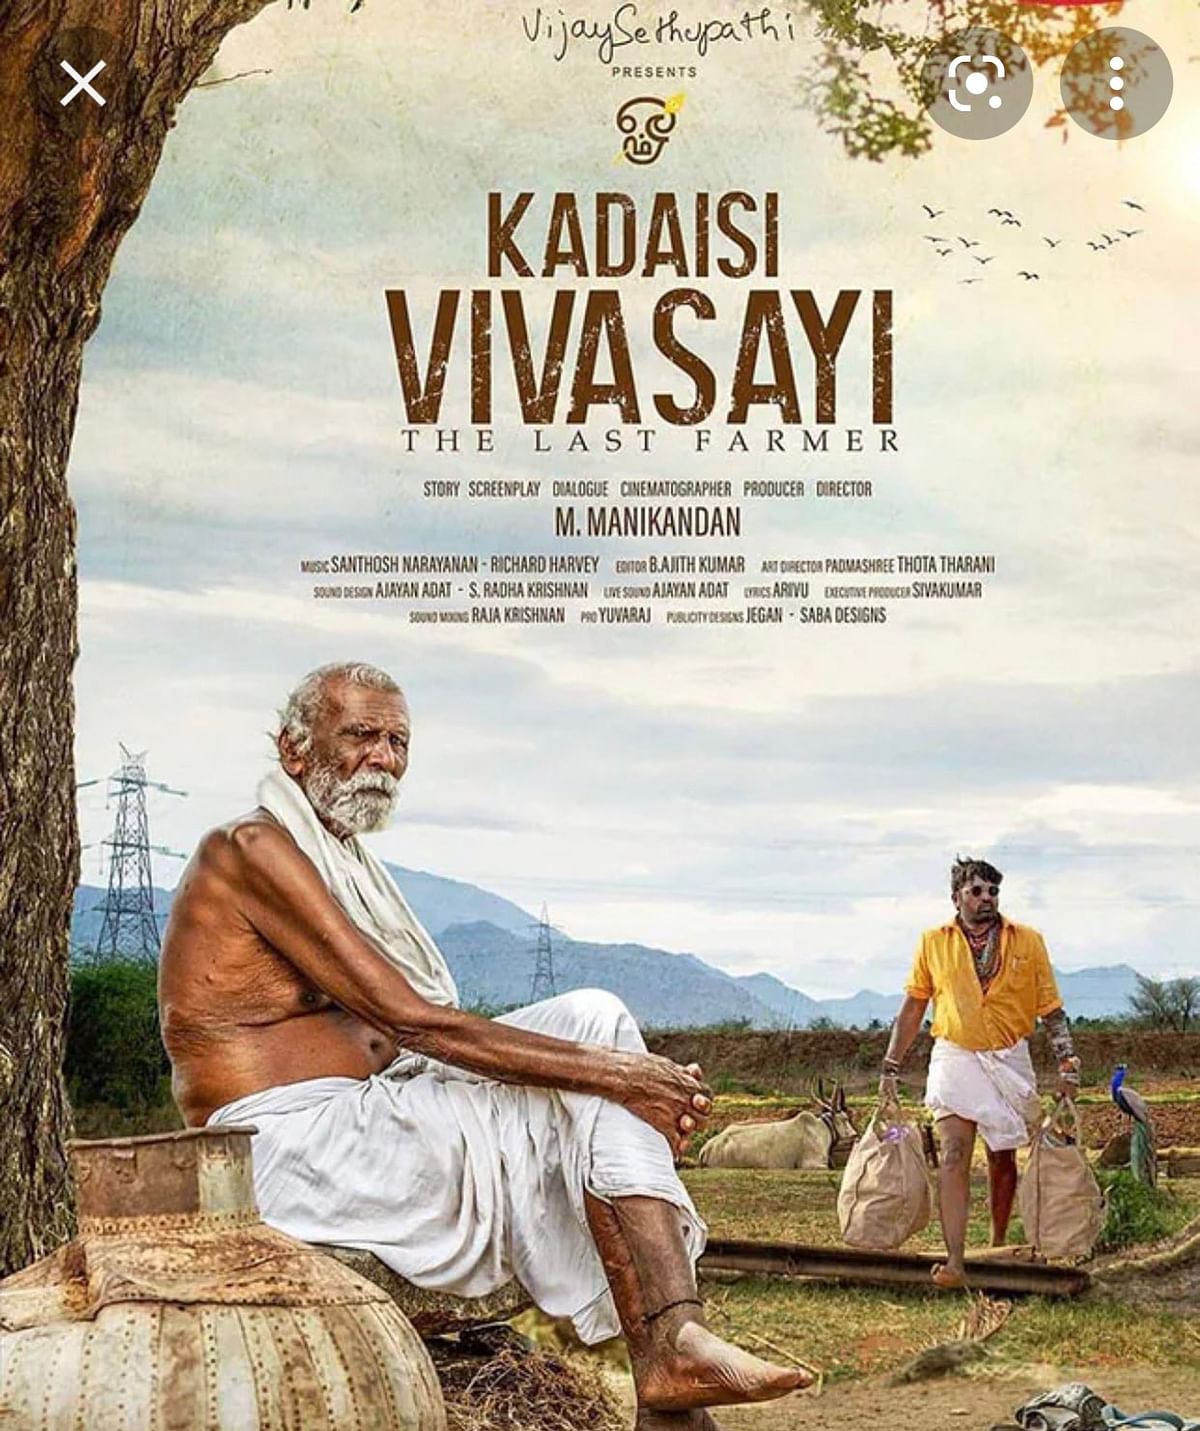 Why 'Kadaisi Vivasayi' works as an issue based engaging film.